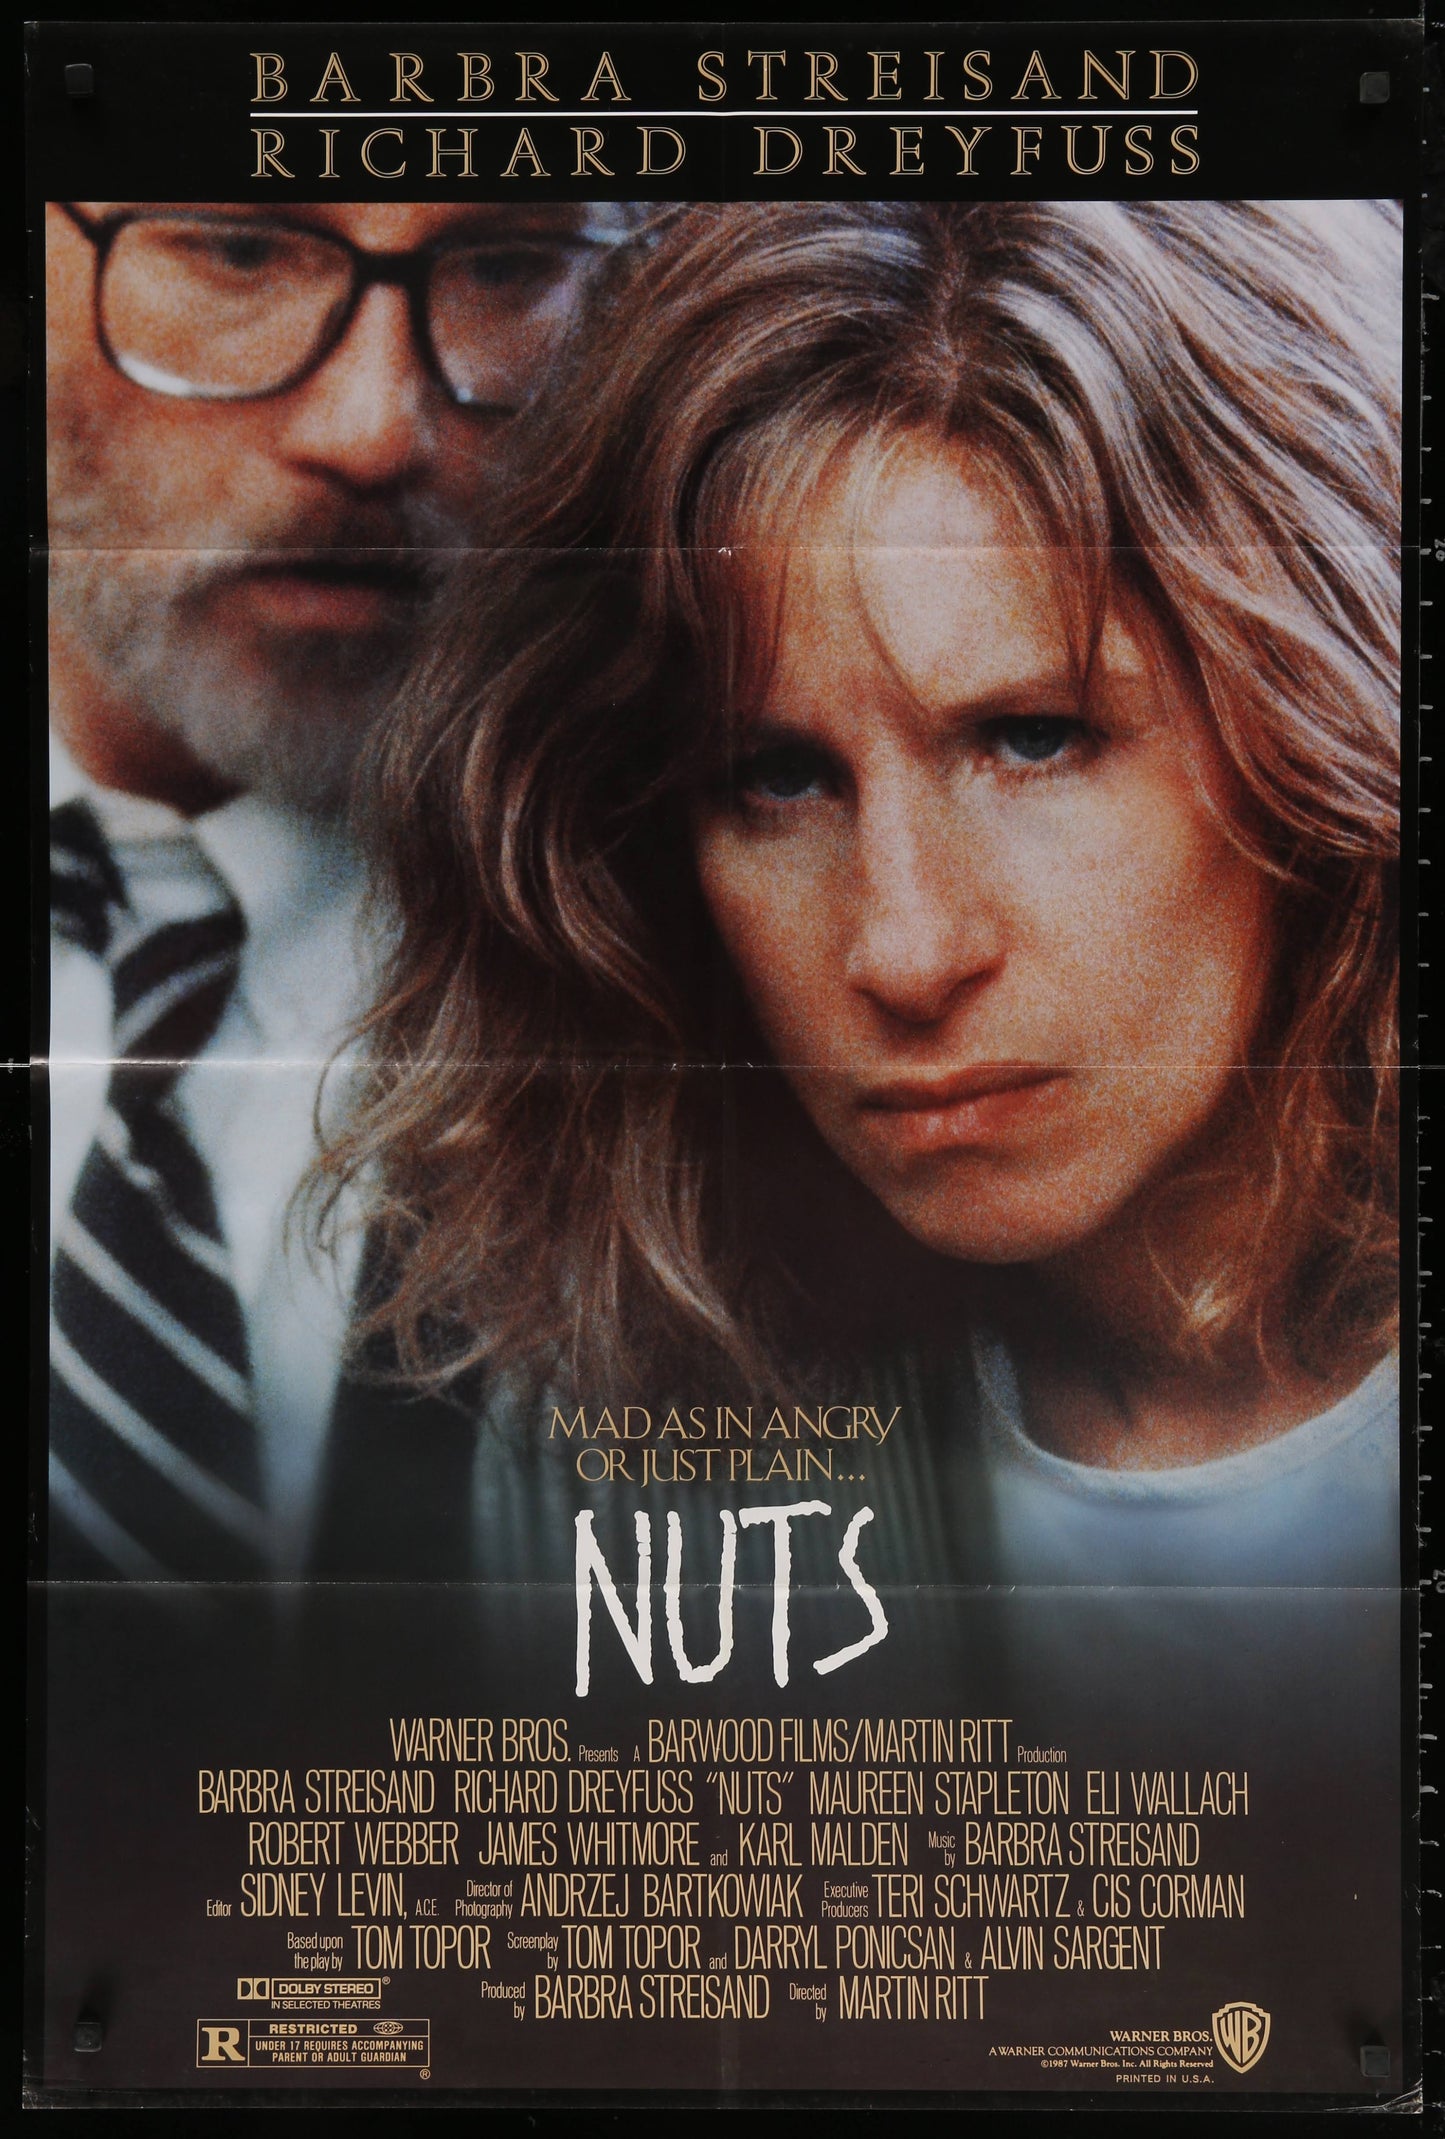 Nuts US One Sheet (1987) - ORIGINAL RELEASE - posterpalace.com